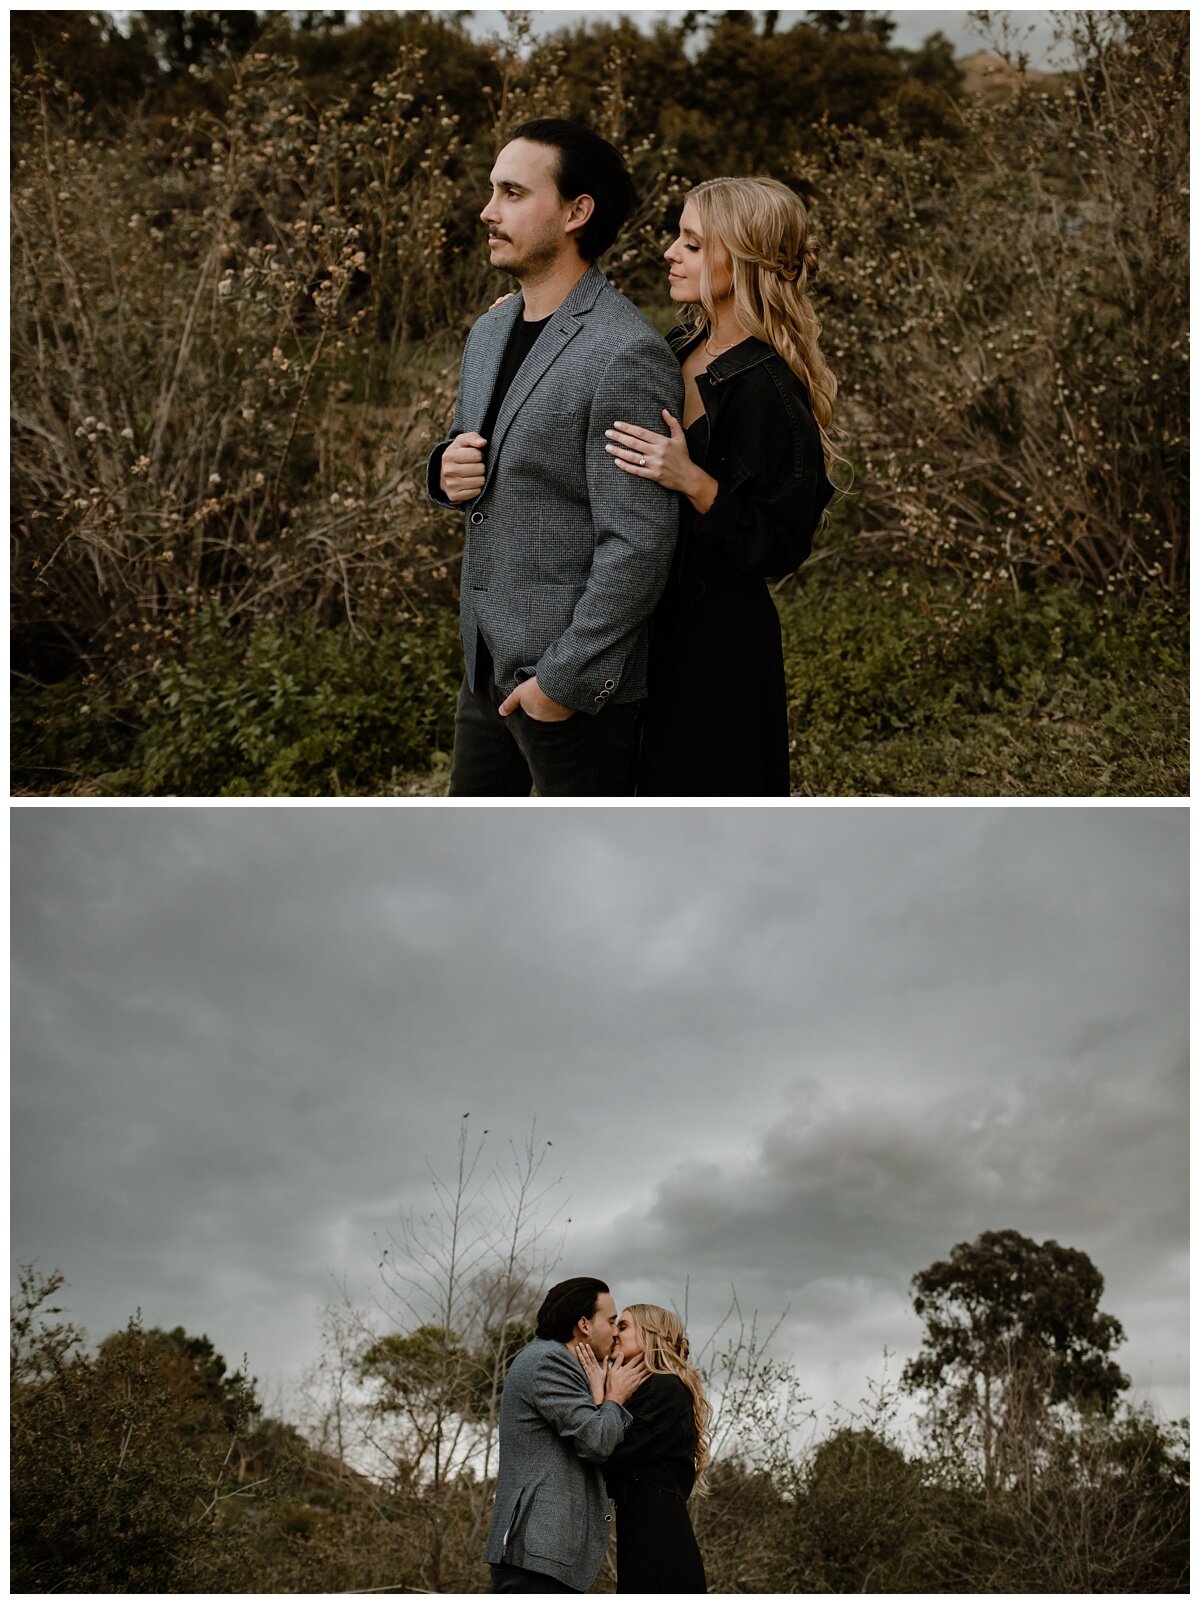 Carbon Canyon Park Orange County - Madeline and Scott Engagement Session - Eve Rox Photography-309_WEB.jpg